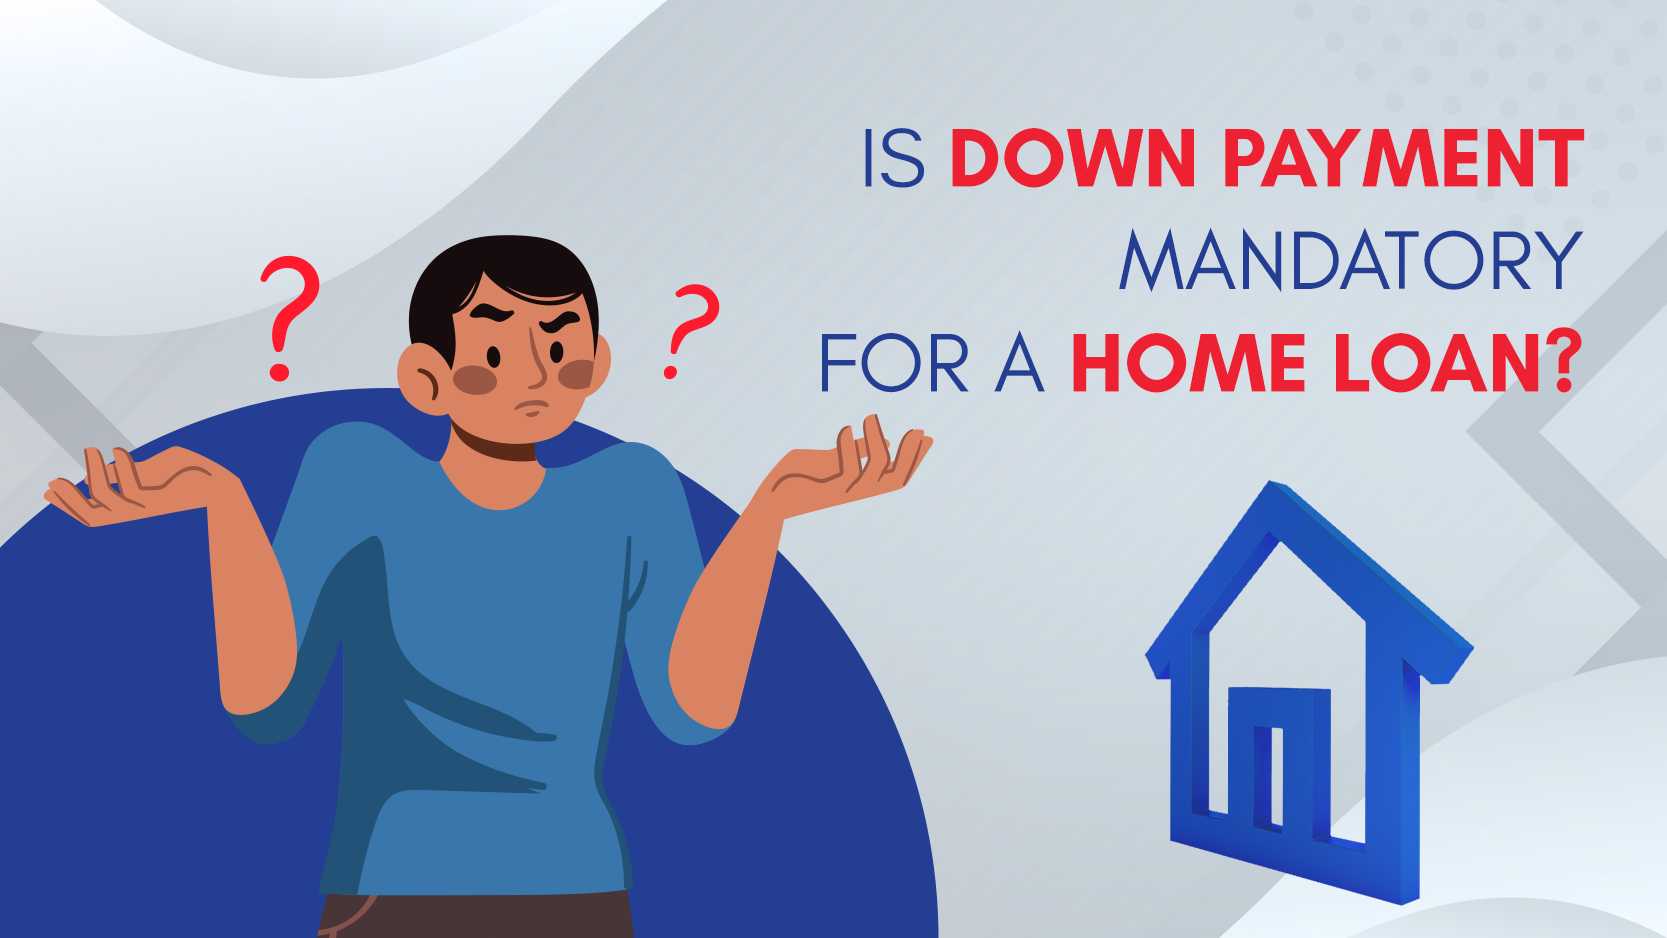 Is a Down Payment Mandatory for a Home Loan?